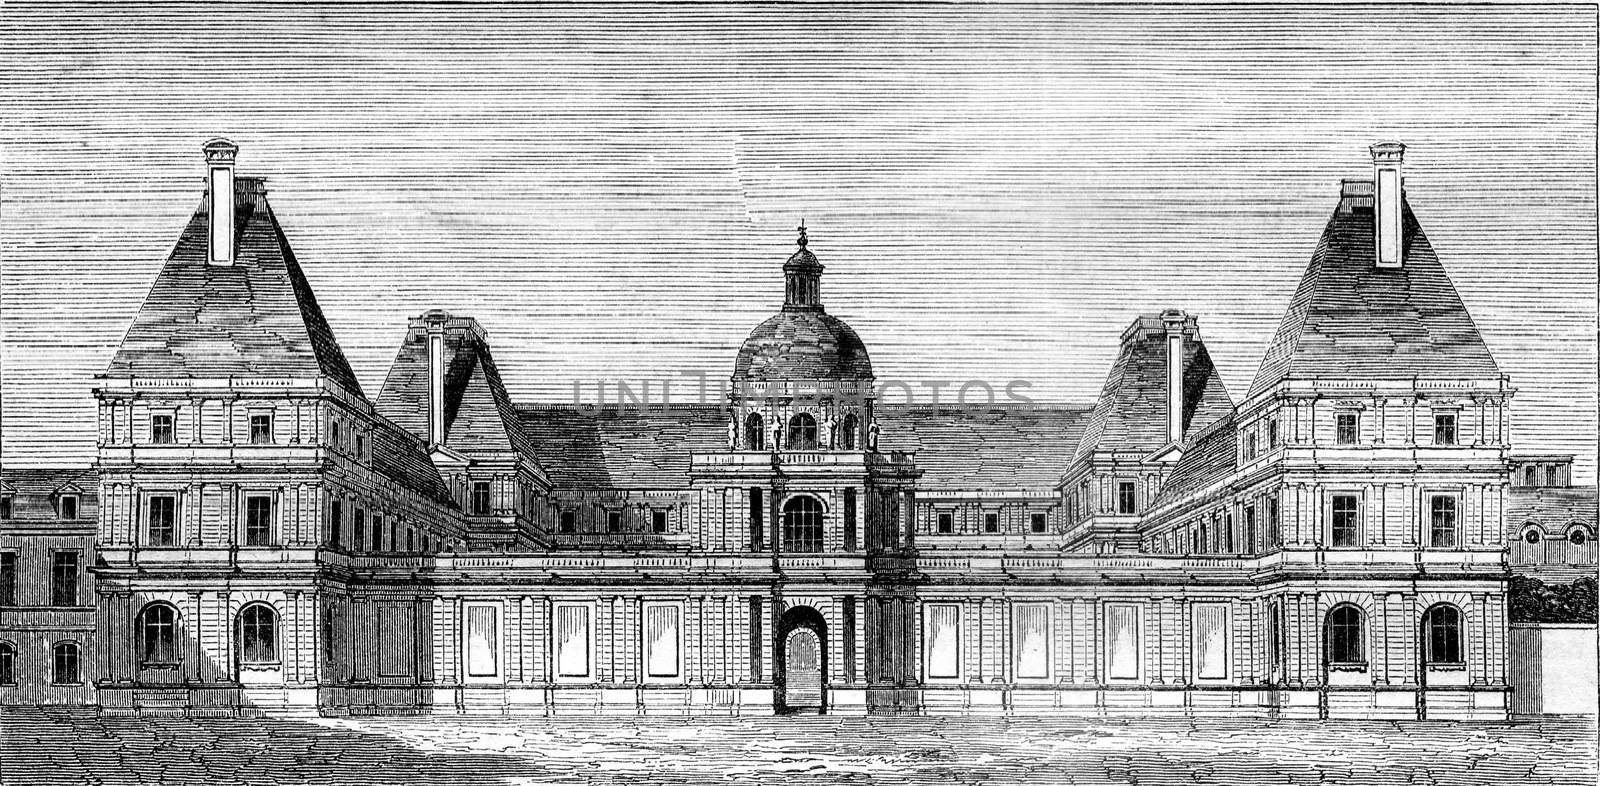 Luxembourg Palace, stand for Marie de Medici, vintage engraving. by Morphart